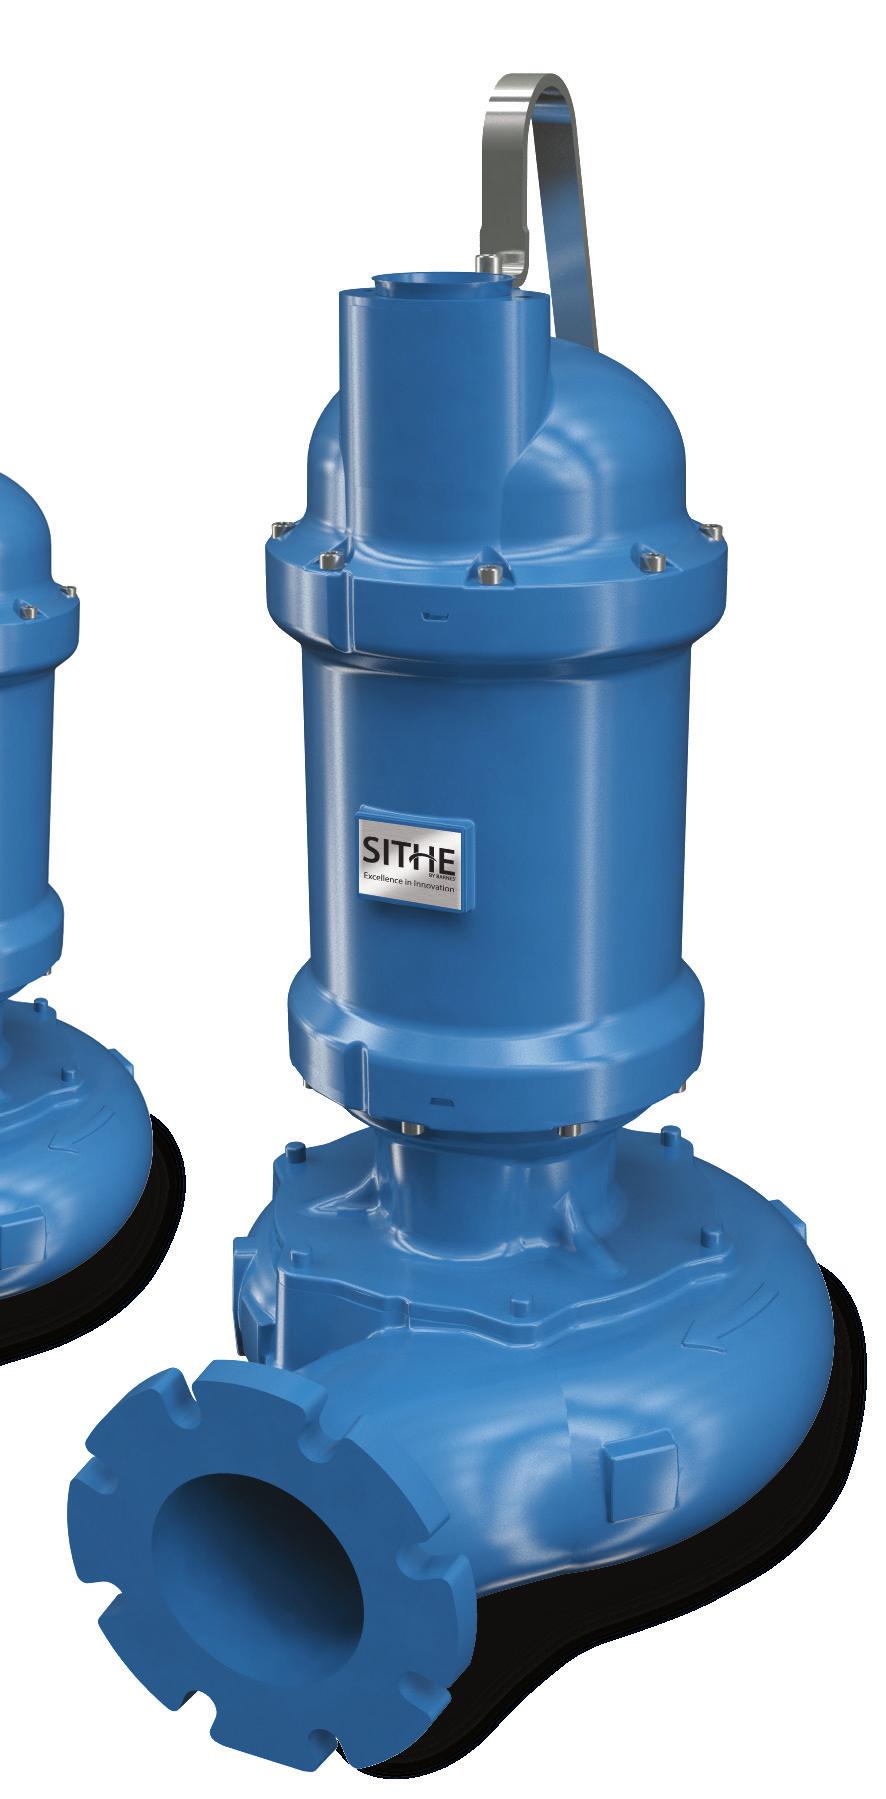 Submersible chopper pumps designed to chop and macerate solids in extremely challenging waste water applications.